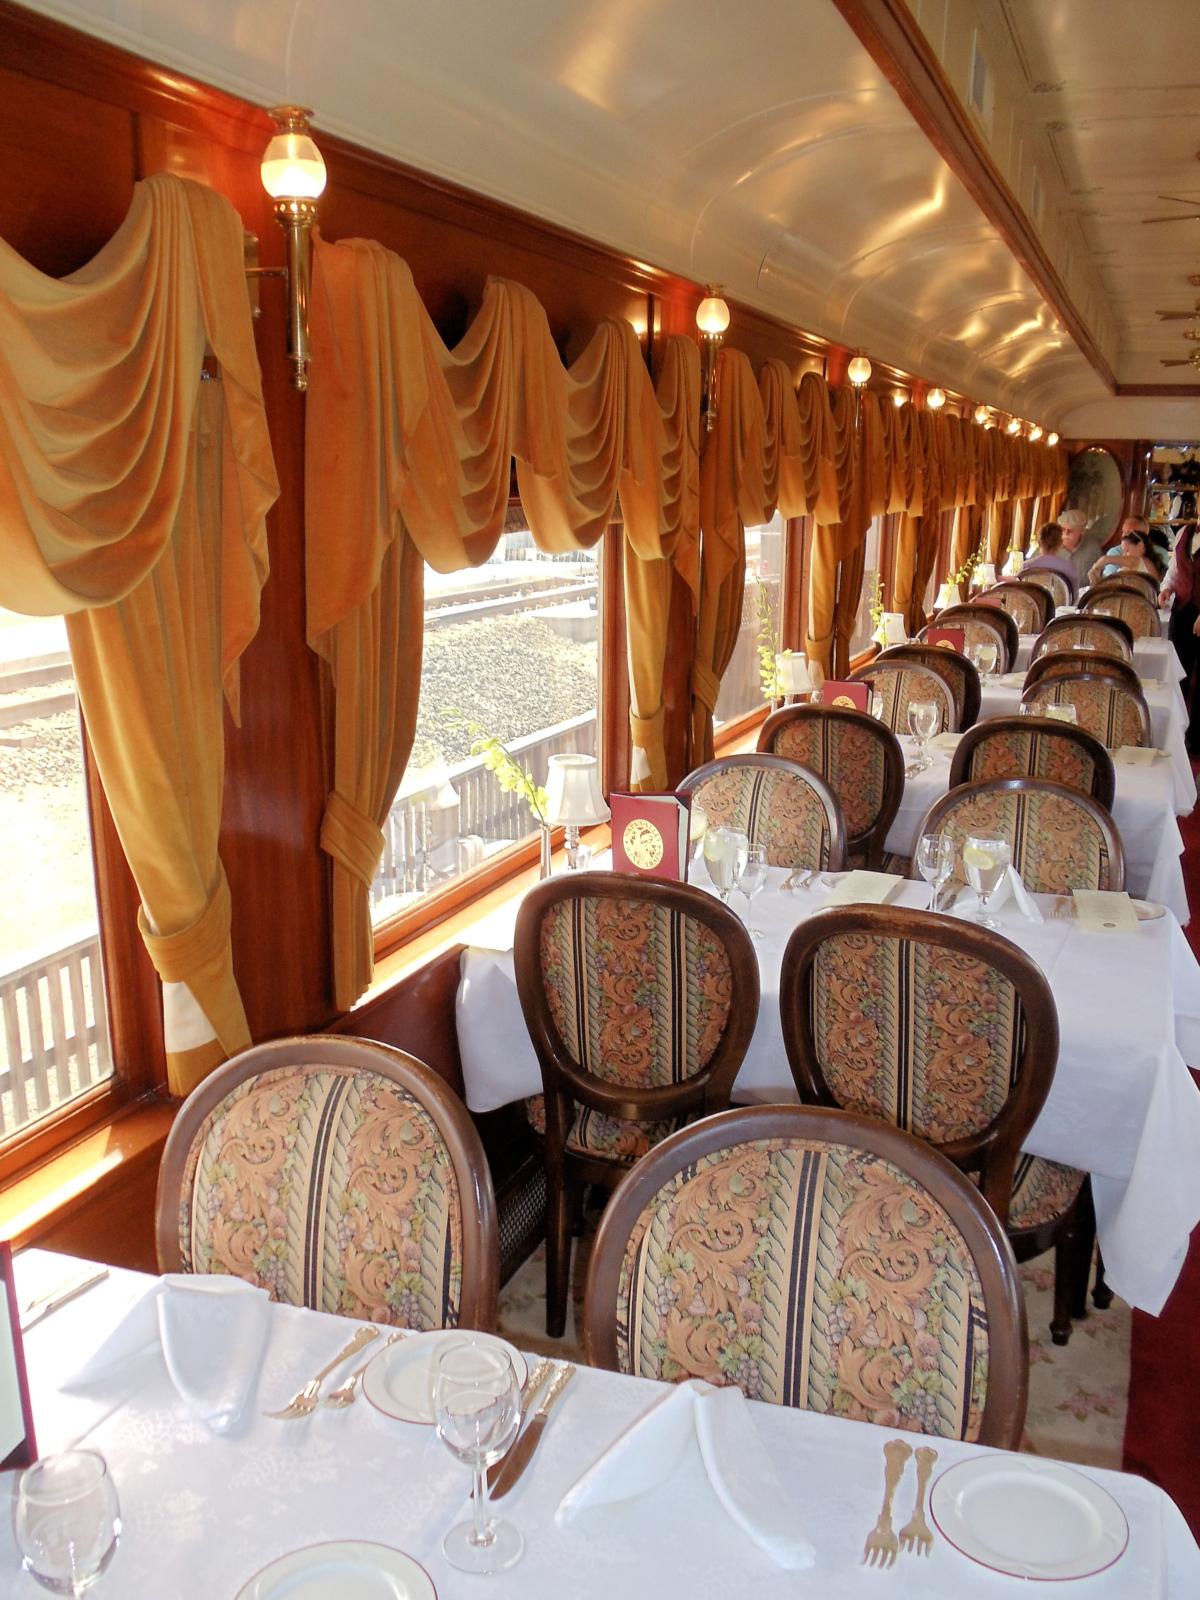 Napa Valley Wine Train. (Jum G (CC0 BY 2.0, CreativeCommons.org/ public domain/by 2.0))